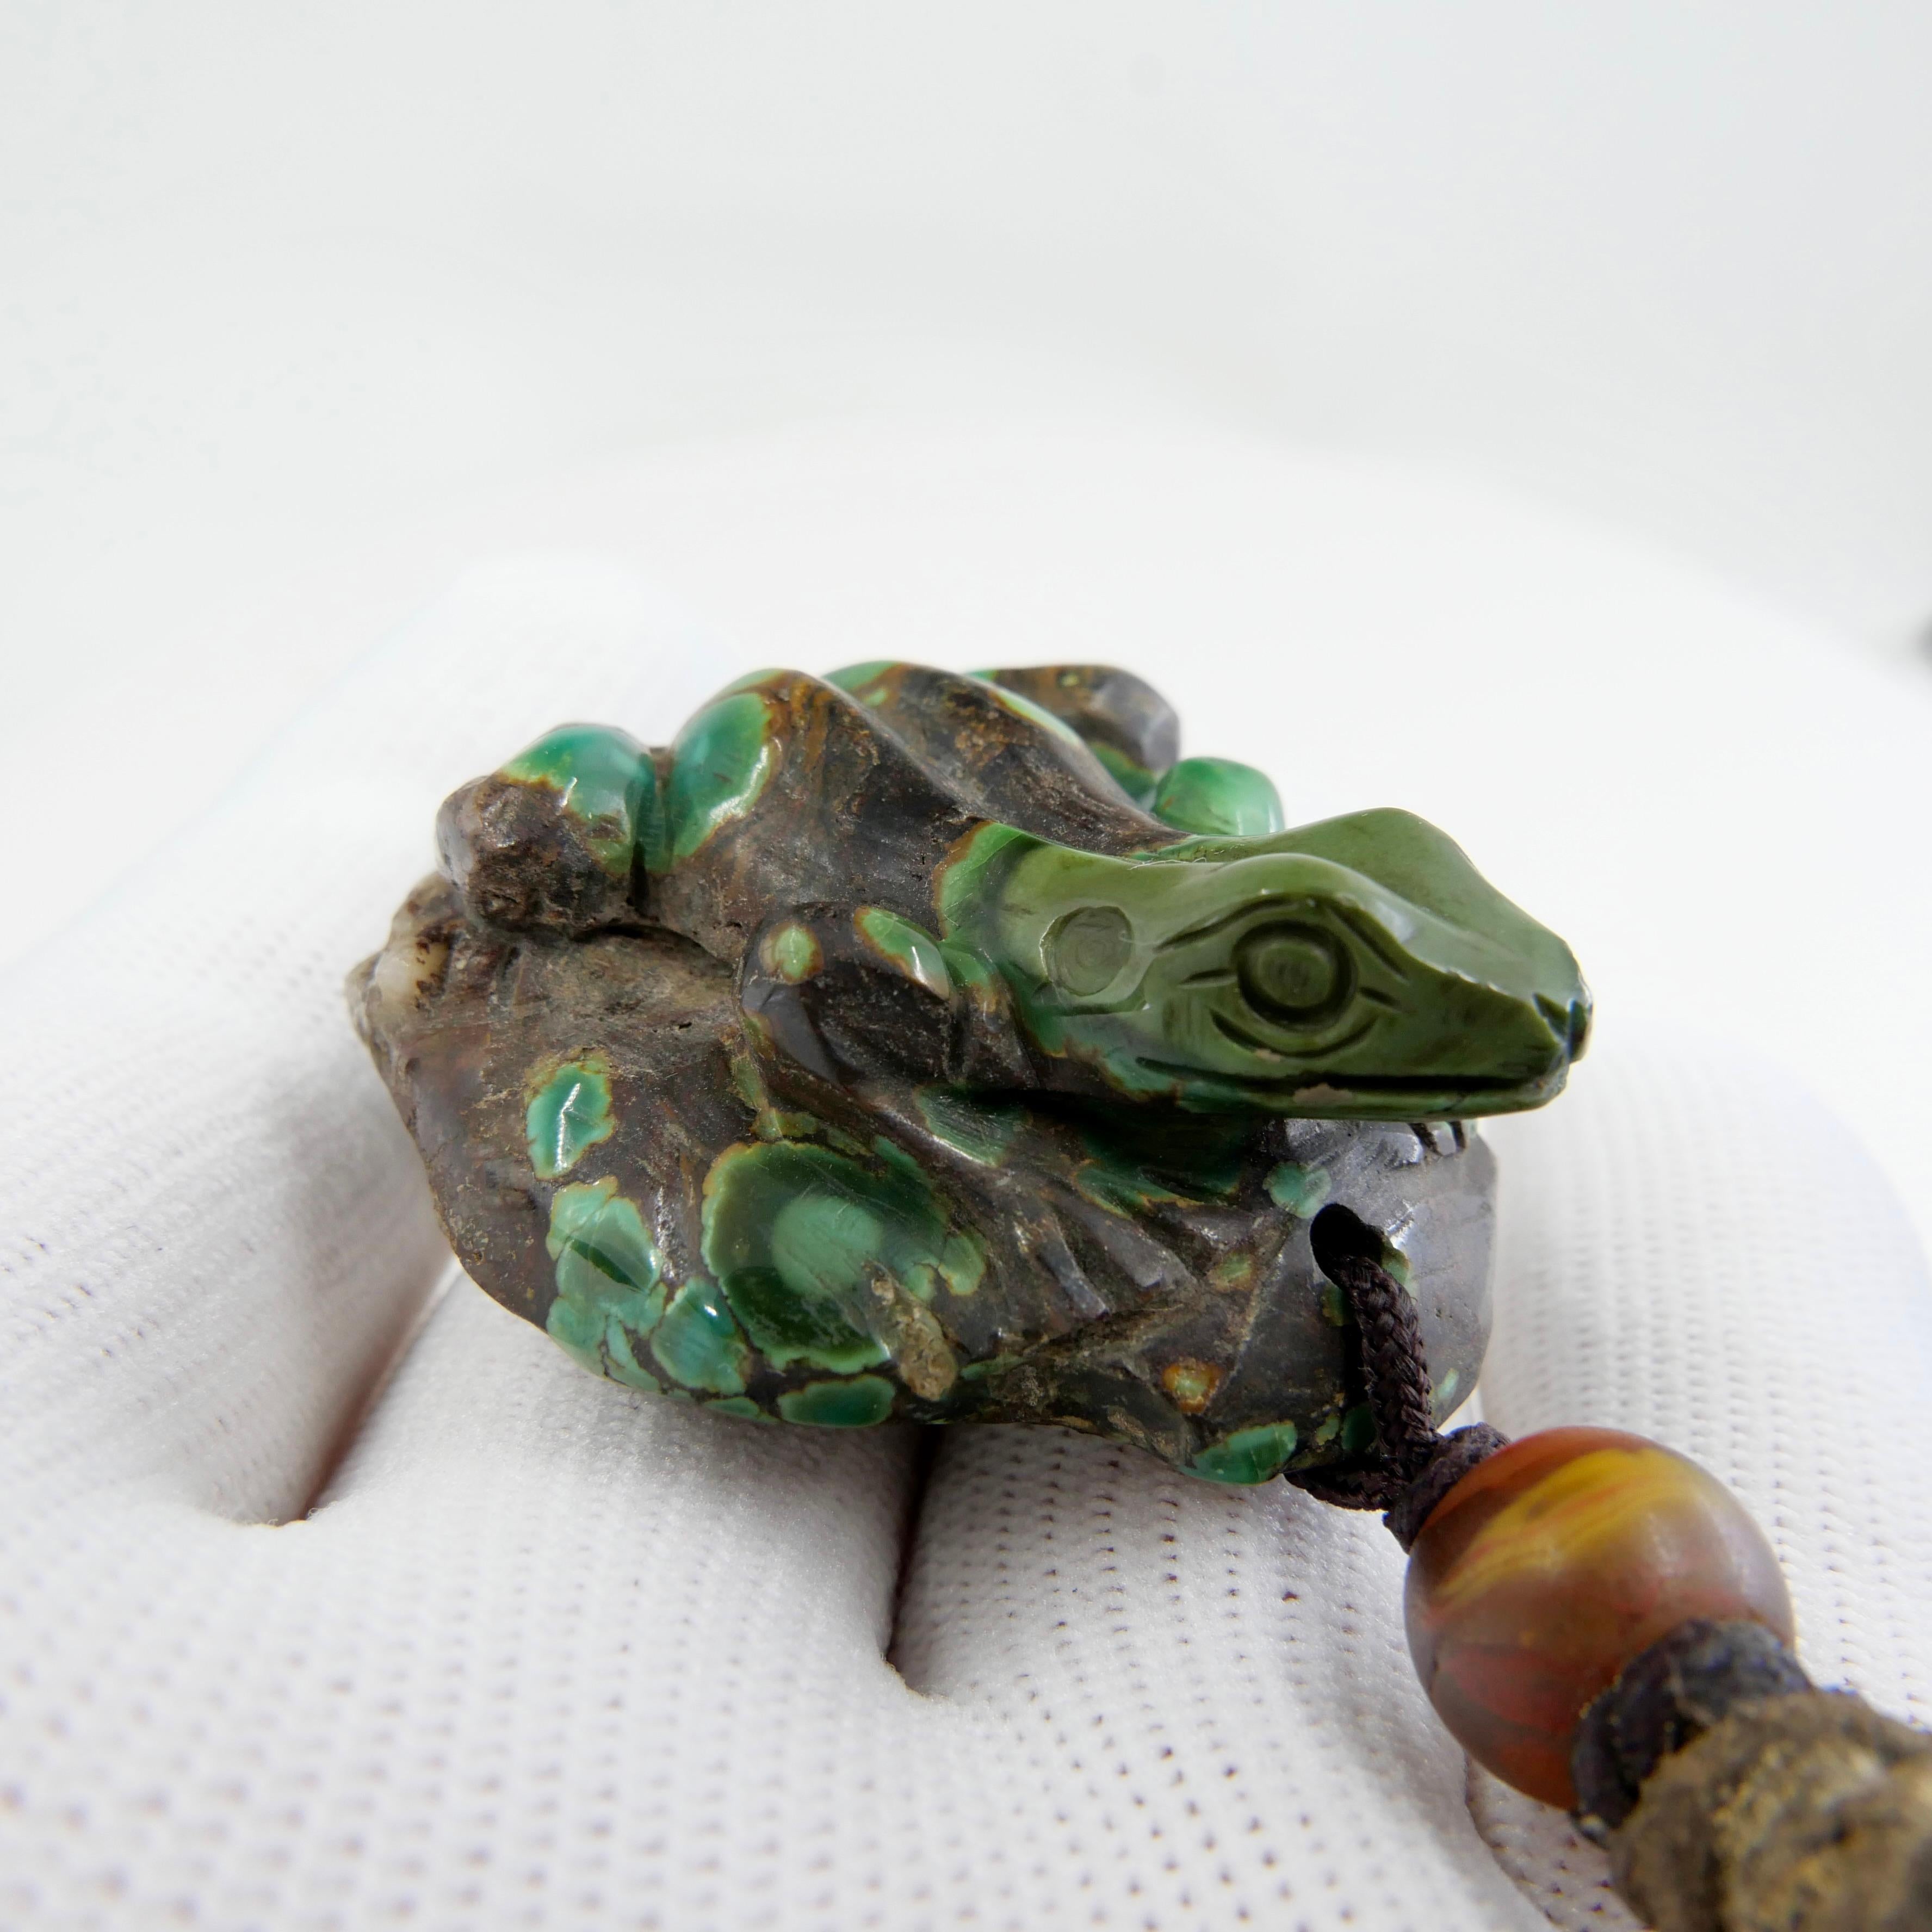 Please check out the HD video! For your consideration is a natural Turquoise carving of a frog. This frog is very well carved. We estimate this piece was made just over 100 years ago. The Turquoise carving is very lifelike, with excellent